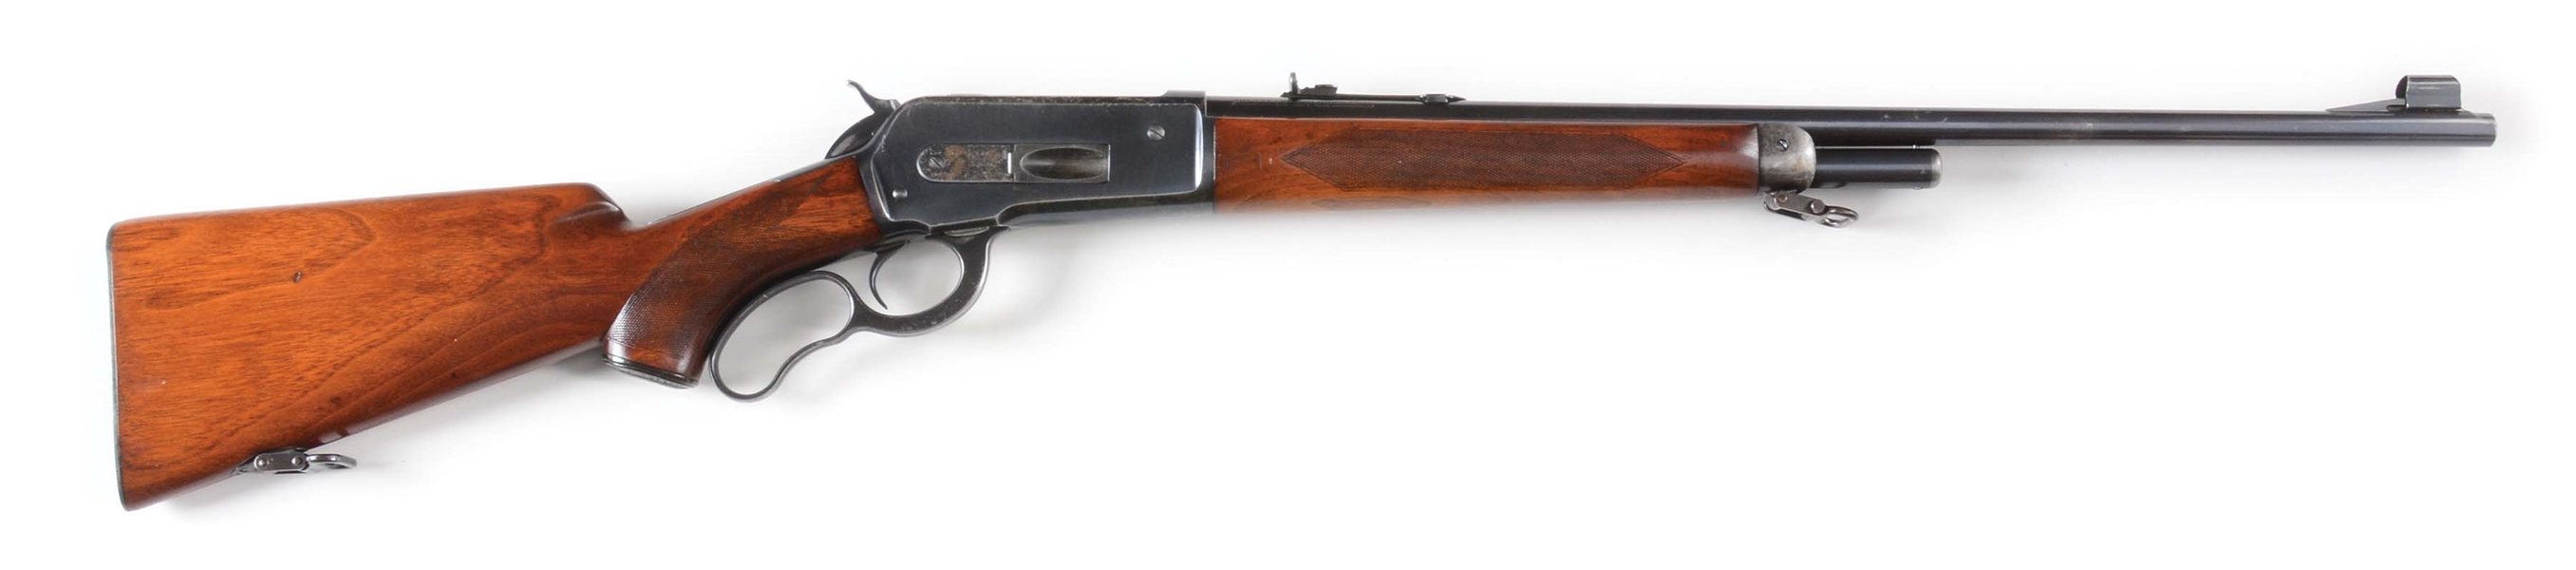 (C) WINCHESTER MODEL 71 DELUXE .348 CALIBER LEVER ACTION RIFLE (1938)